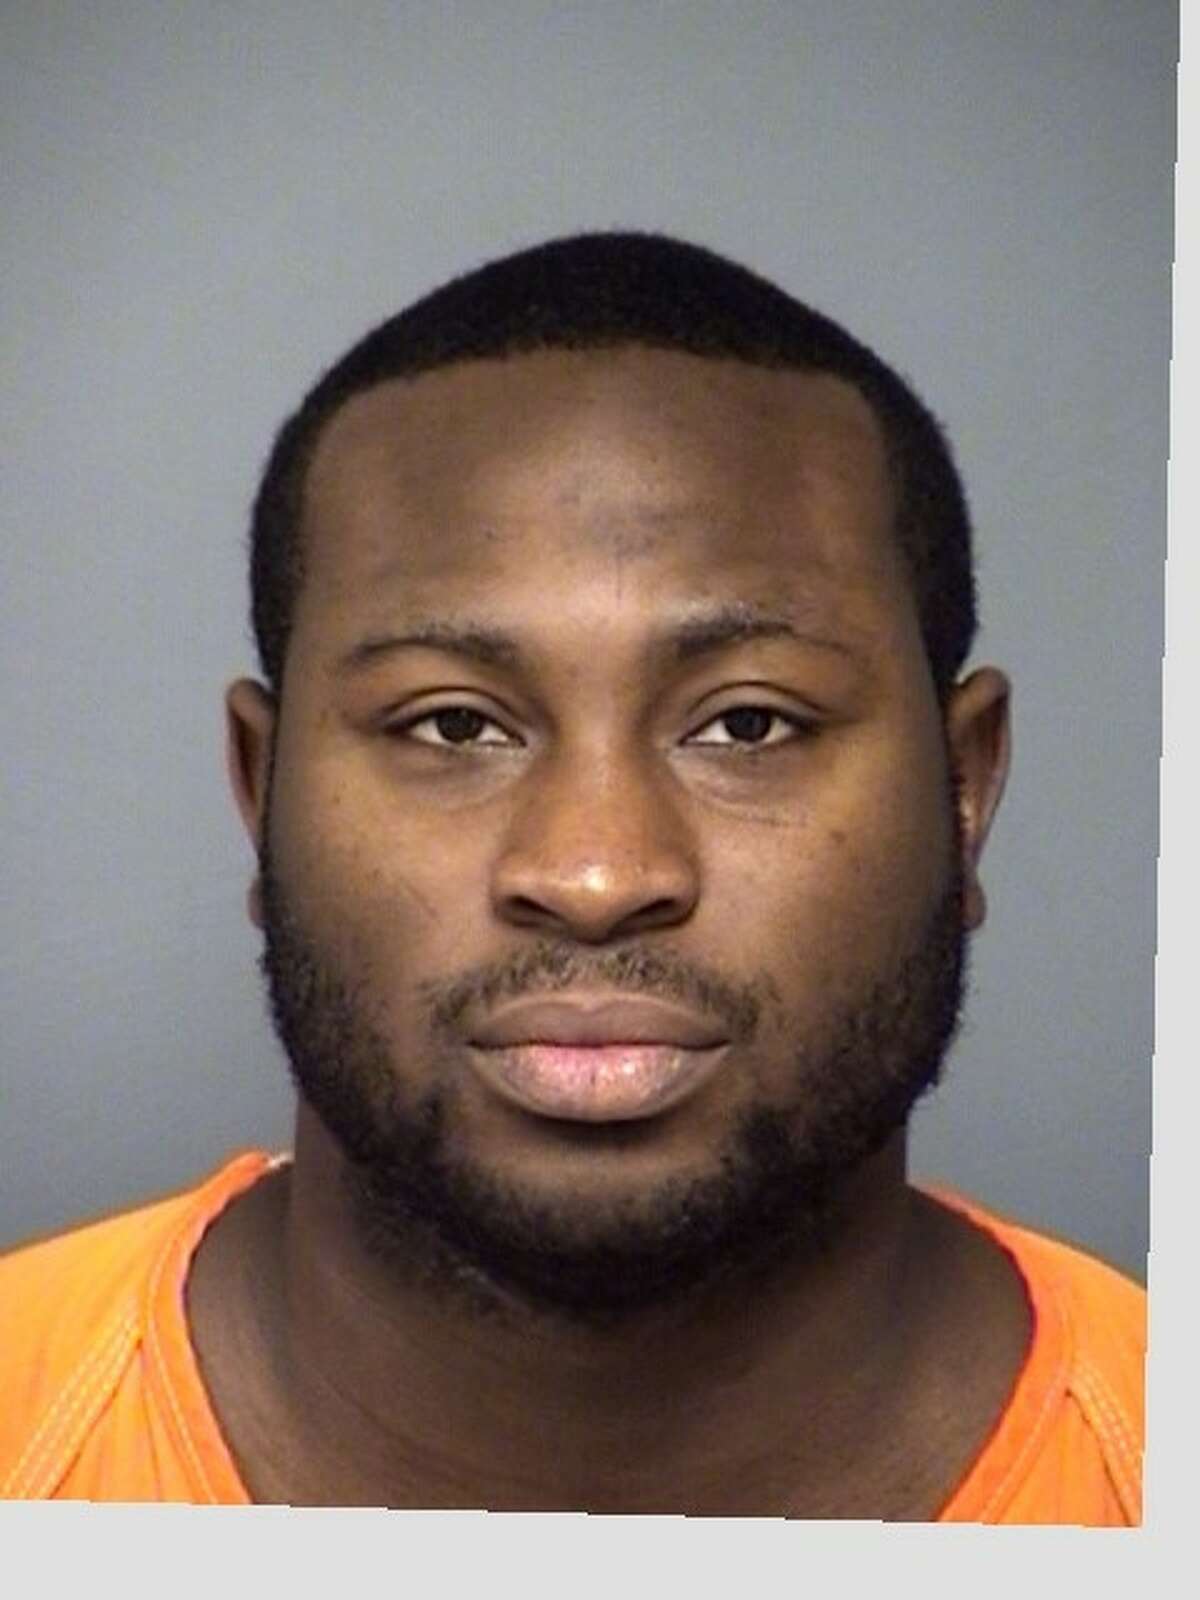 Nigel Chandler, a 26-year-old coach and health teacher at Mesquite High School, was arrested Feb. 18, 2015, and charged with one count of improper relationship between an educator and student after surrendering himself at the Mesquite Jail, according to a news release. Chandler is accused of having sexual relations with an 18-year-old female student on Feb. 10, 2015, the release said.